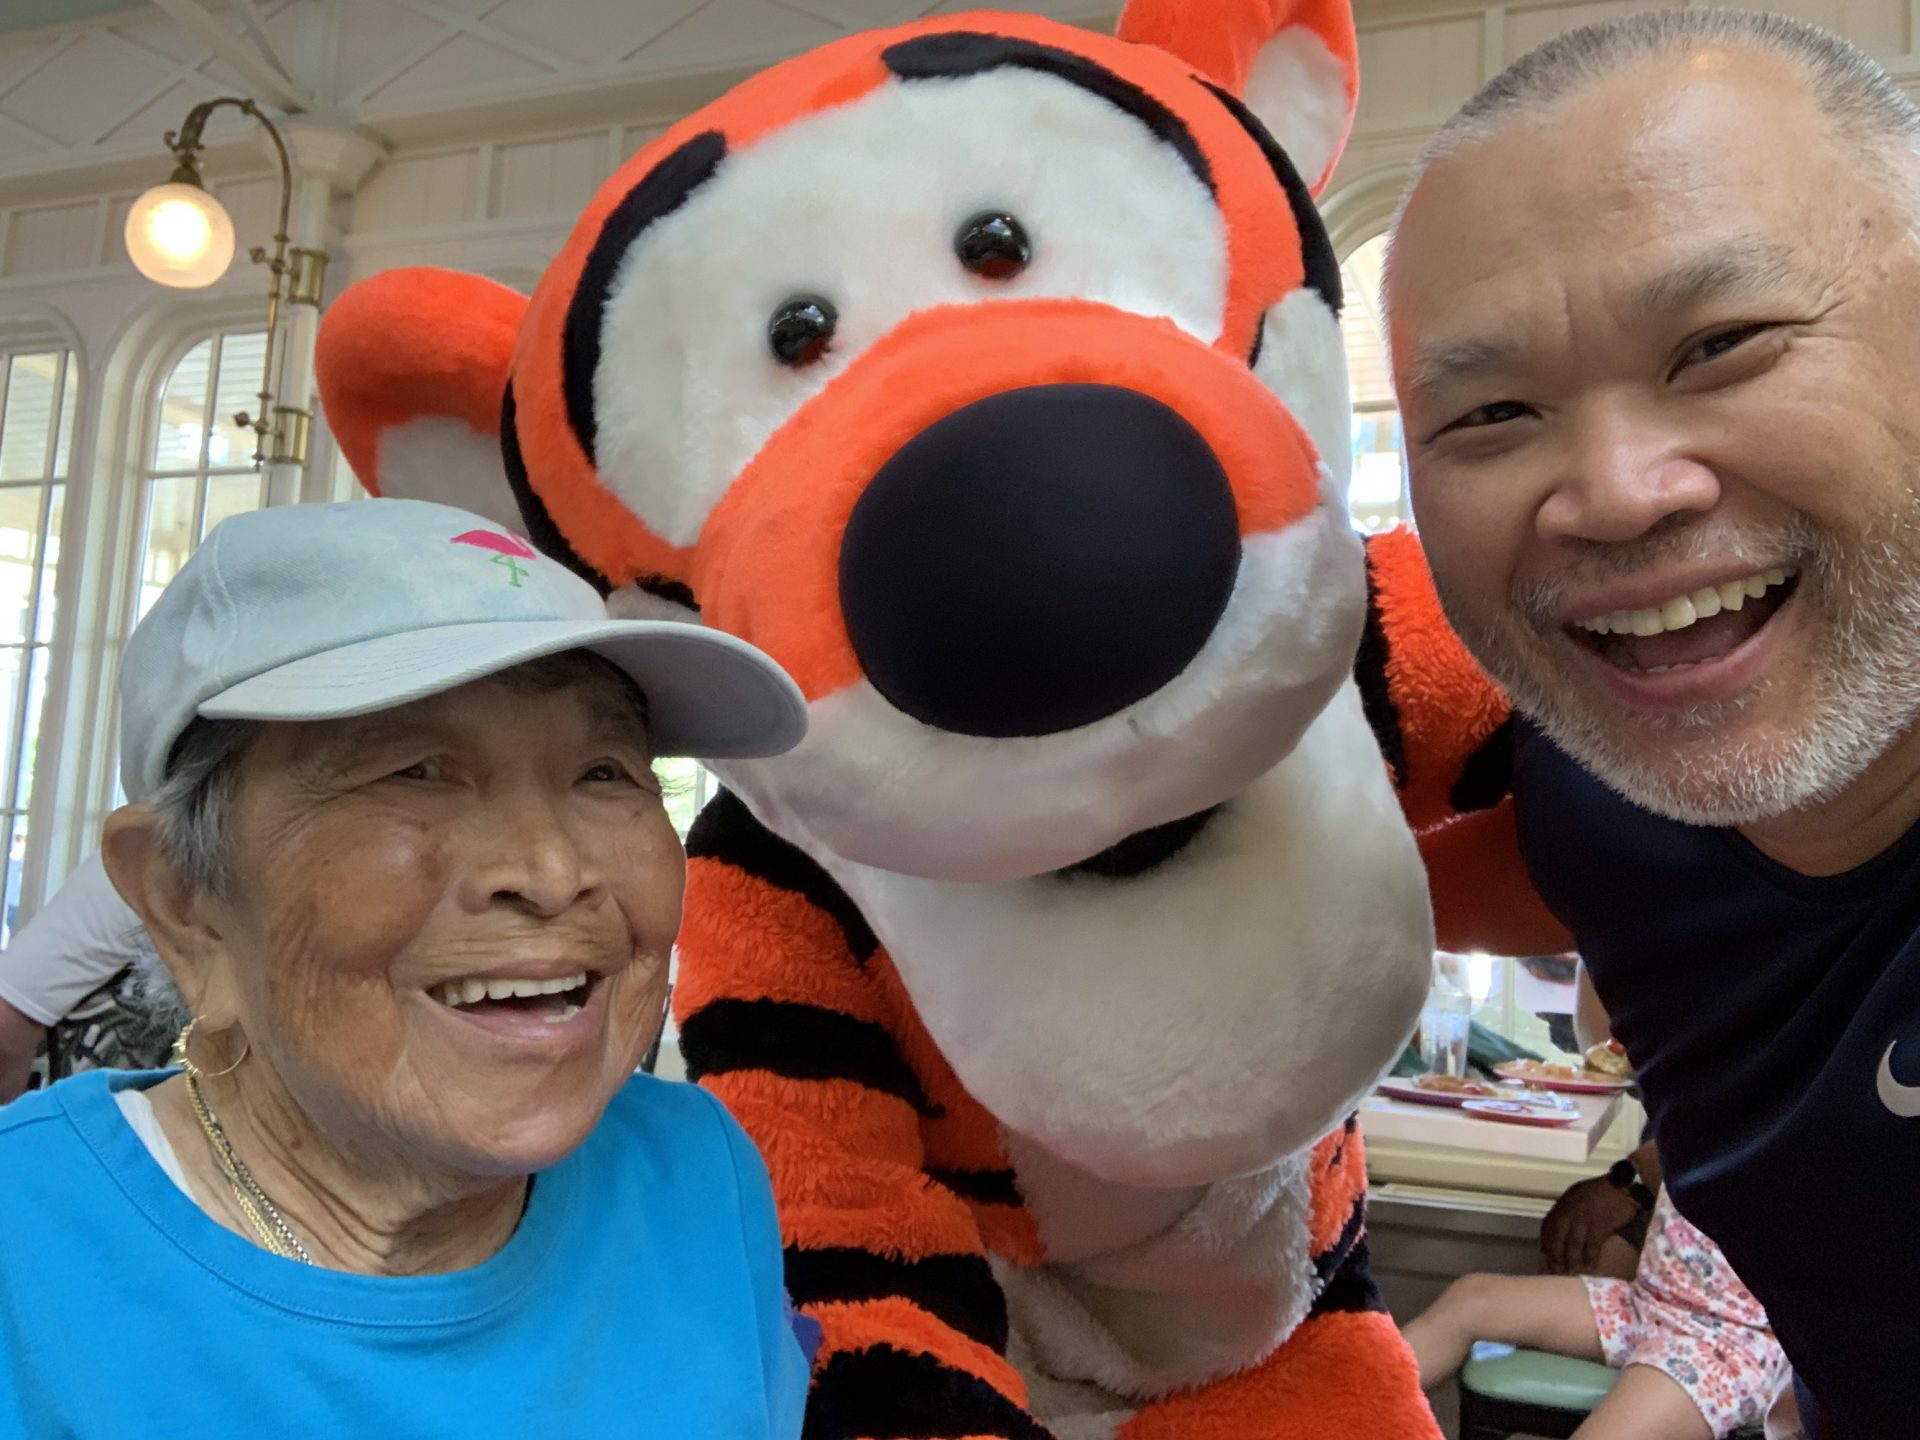 Lunch with Tigger at the Crystal Palace, Magic Kingdom June 21, 2019